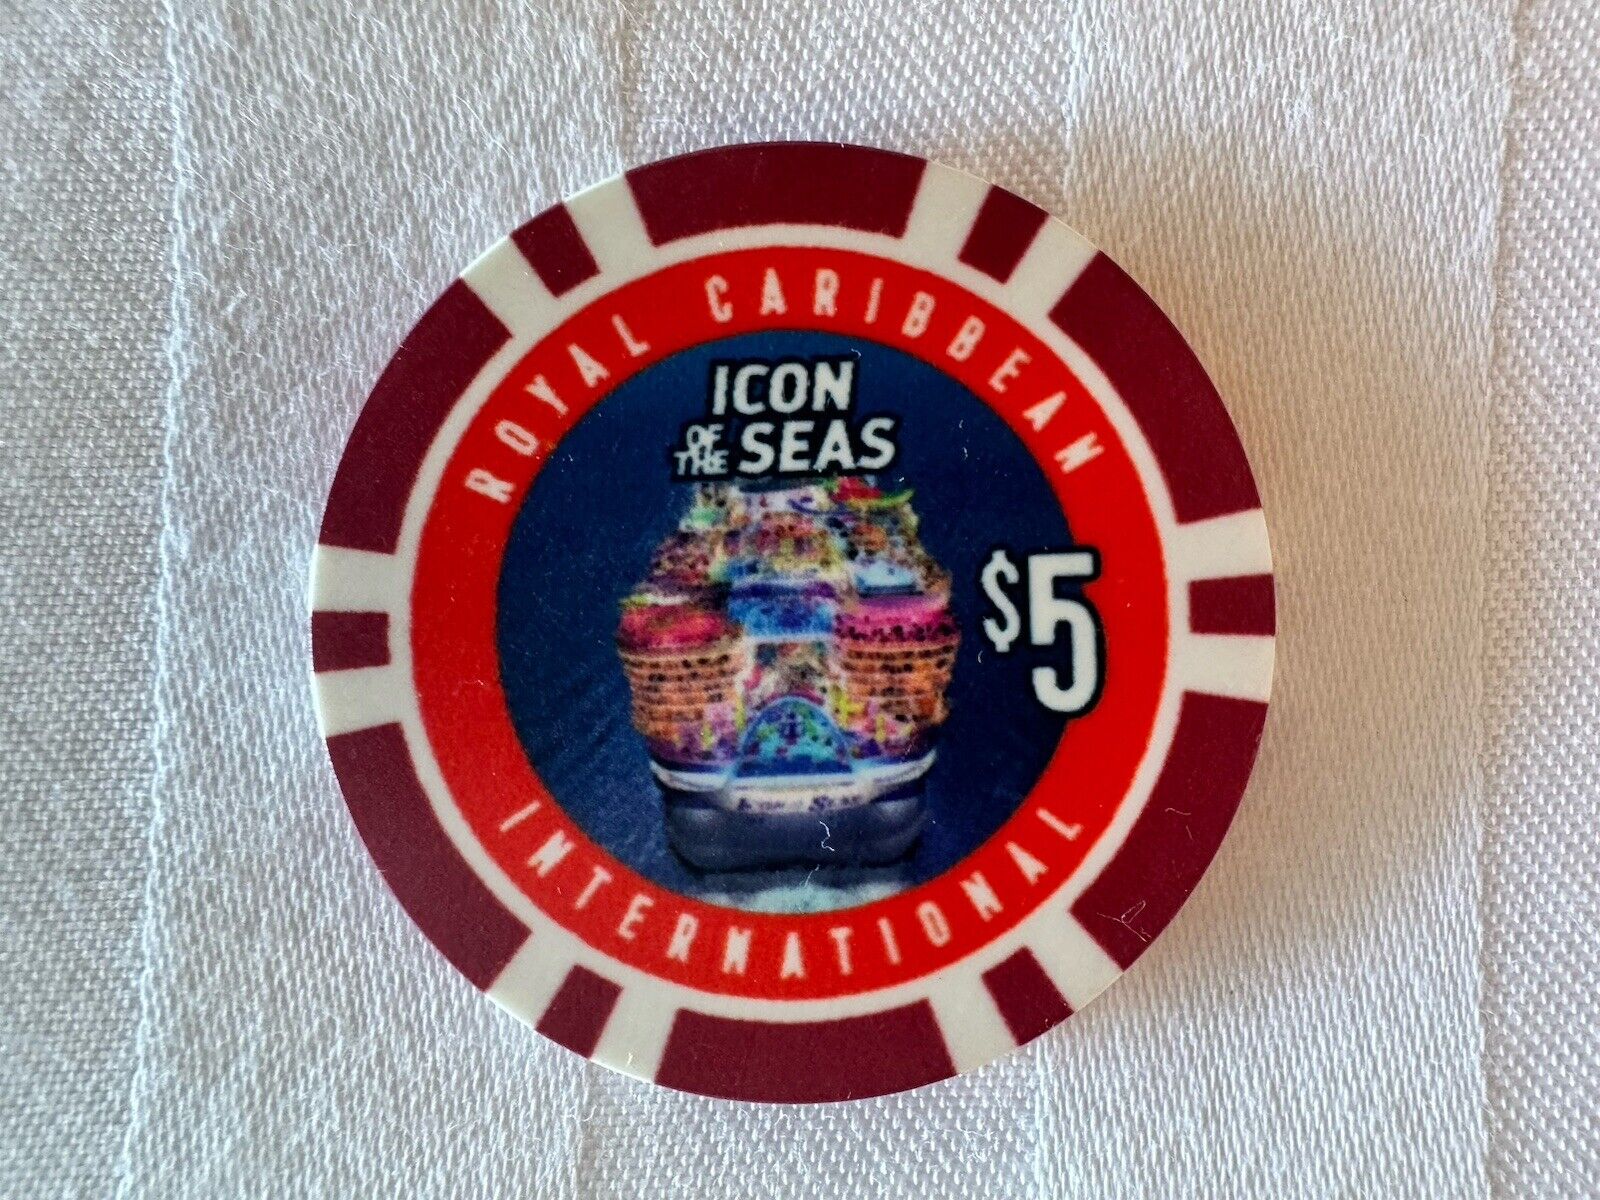 ICON Of The SEAS Royal Caribbean $5 CASINO ROYALE Poker Chip  Newest Ship Craps